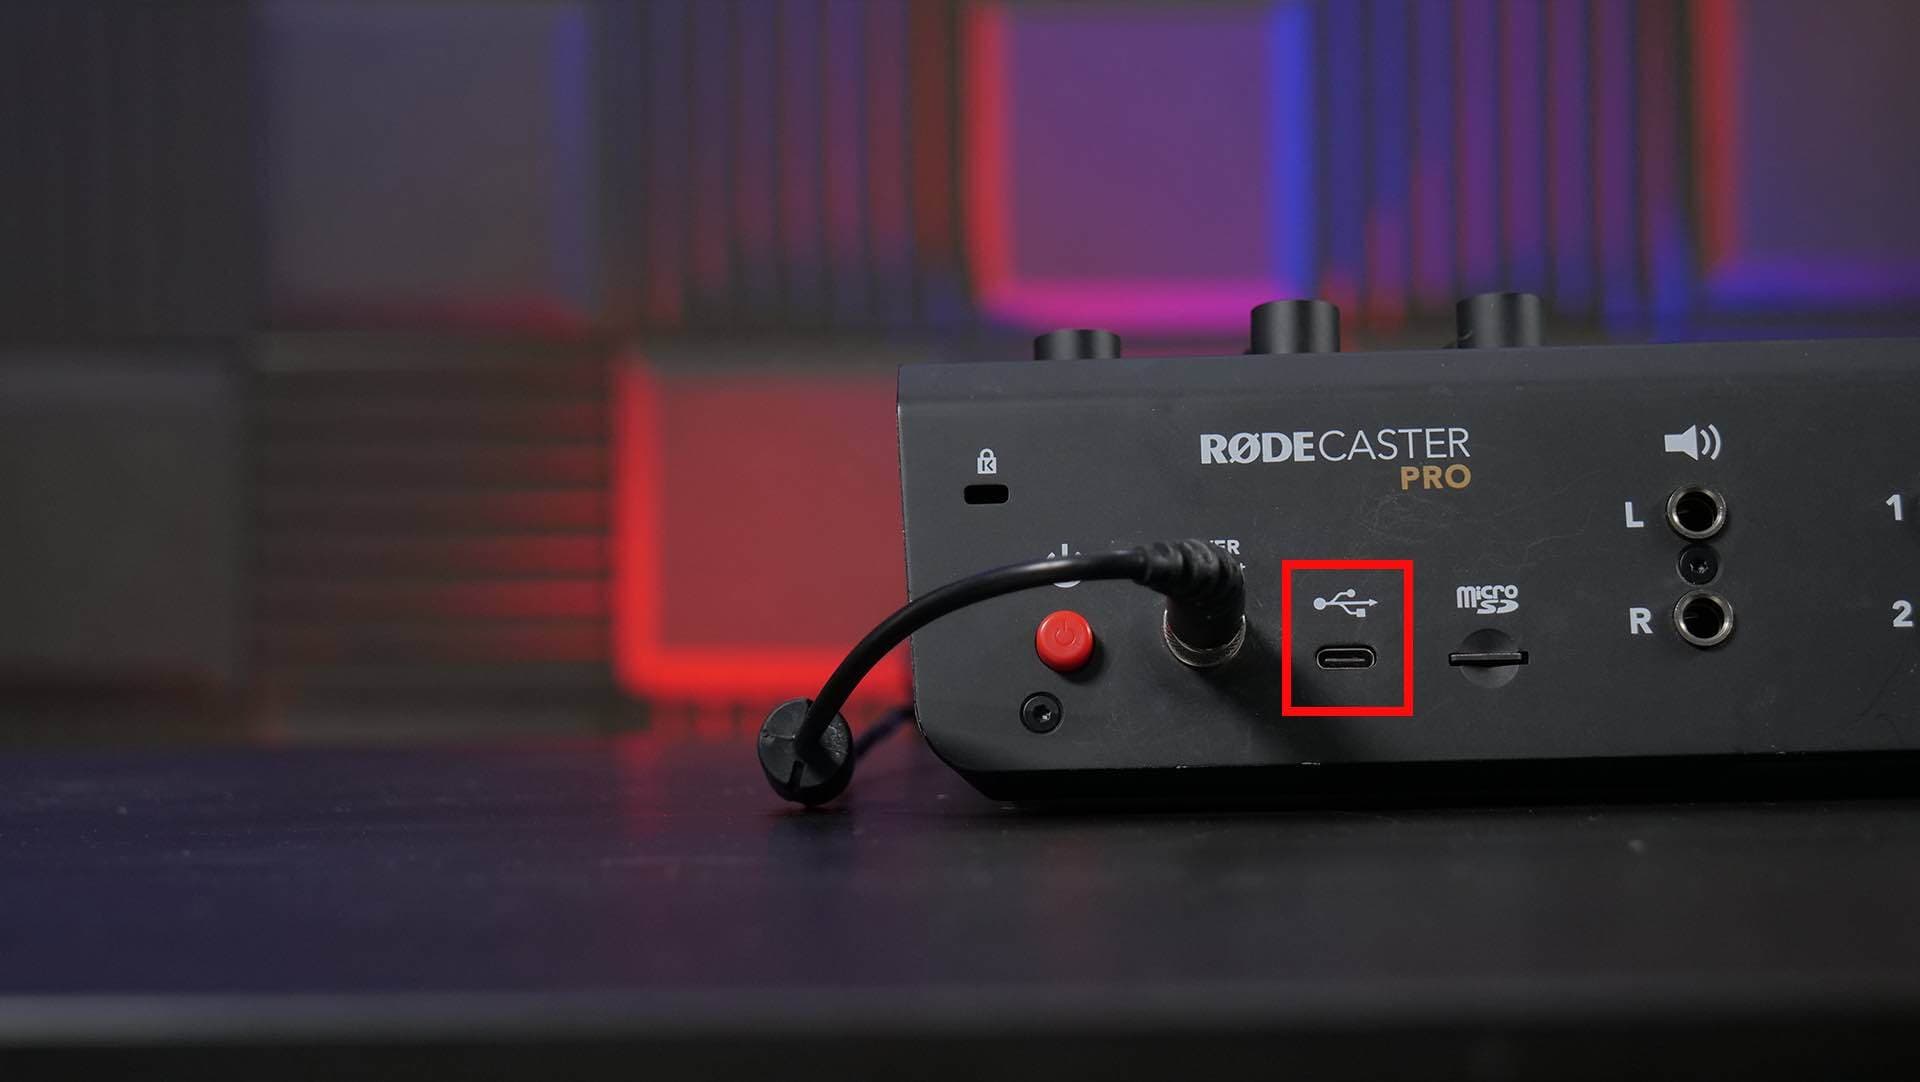 How to Broadcast Live Radio with the Rodecaster Pro USB Input